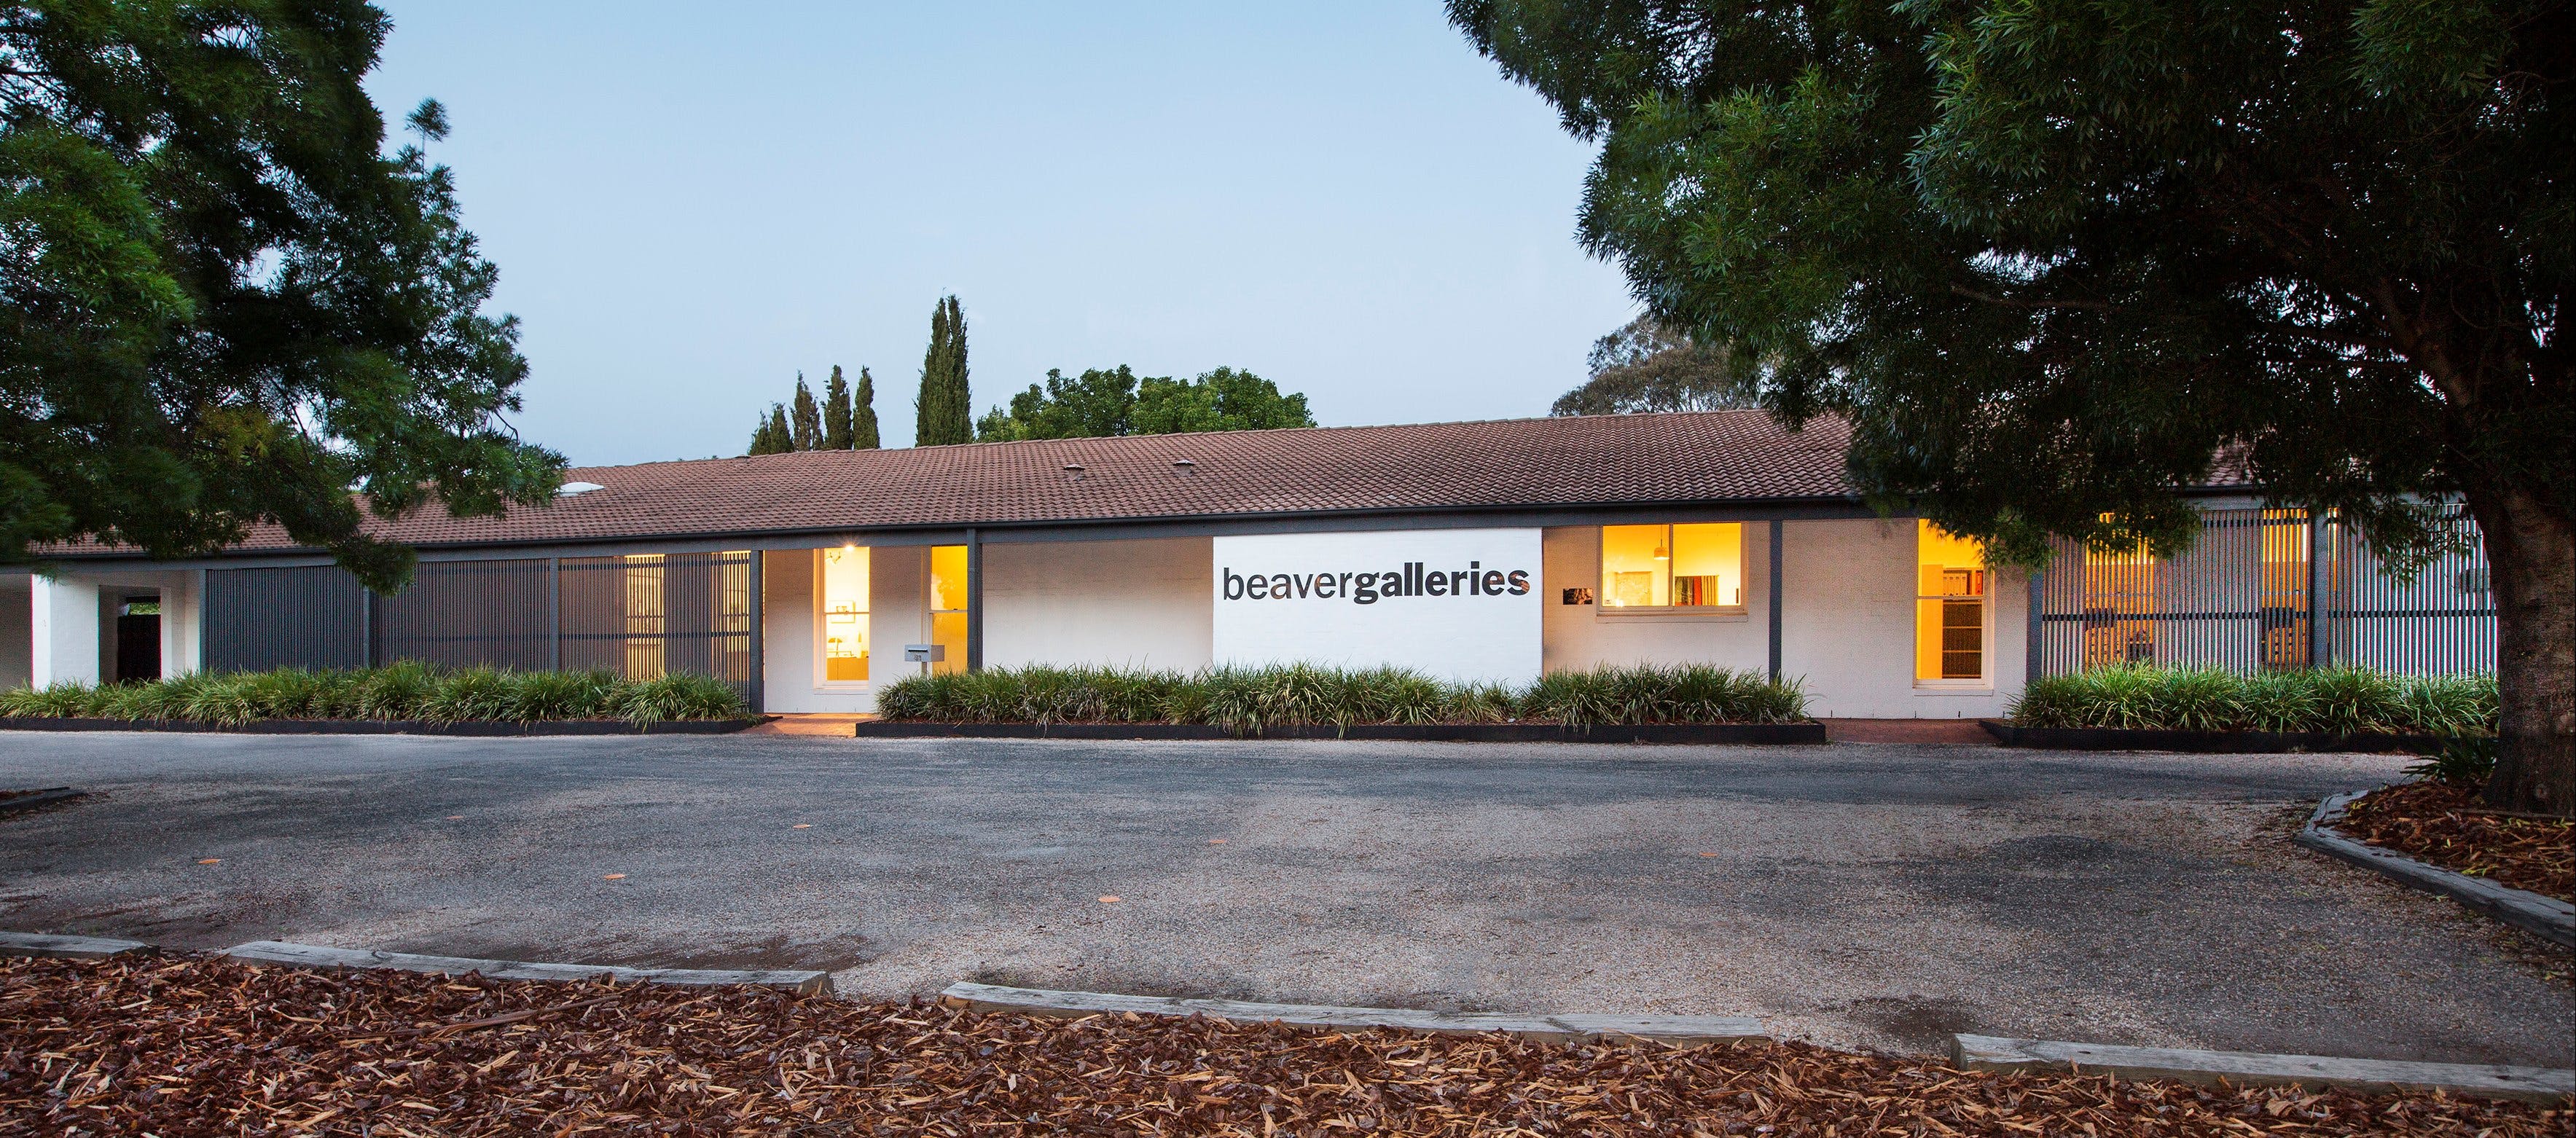 Beaver Galleries - Accommodation VIC